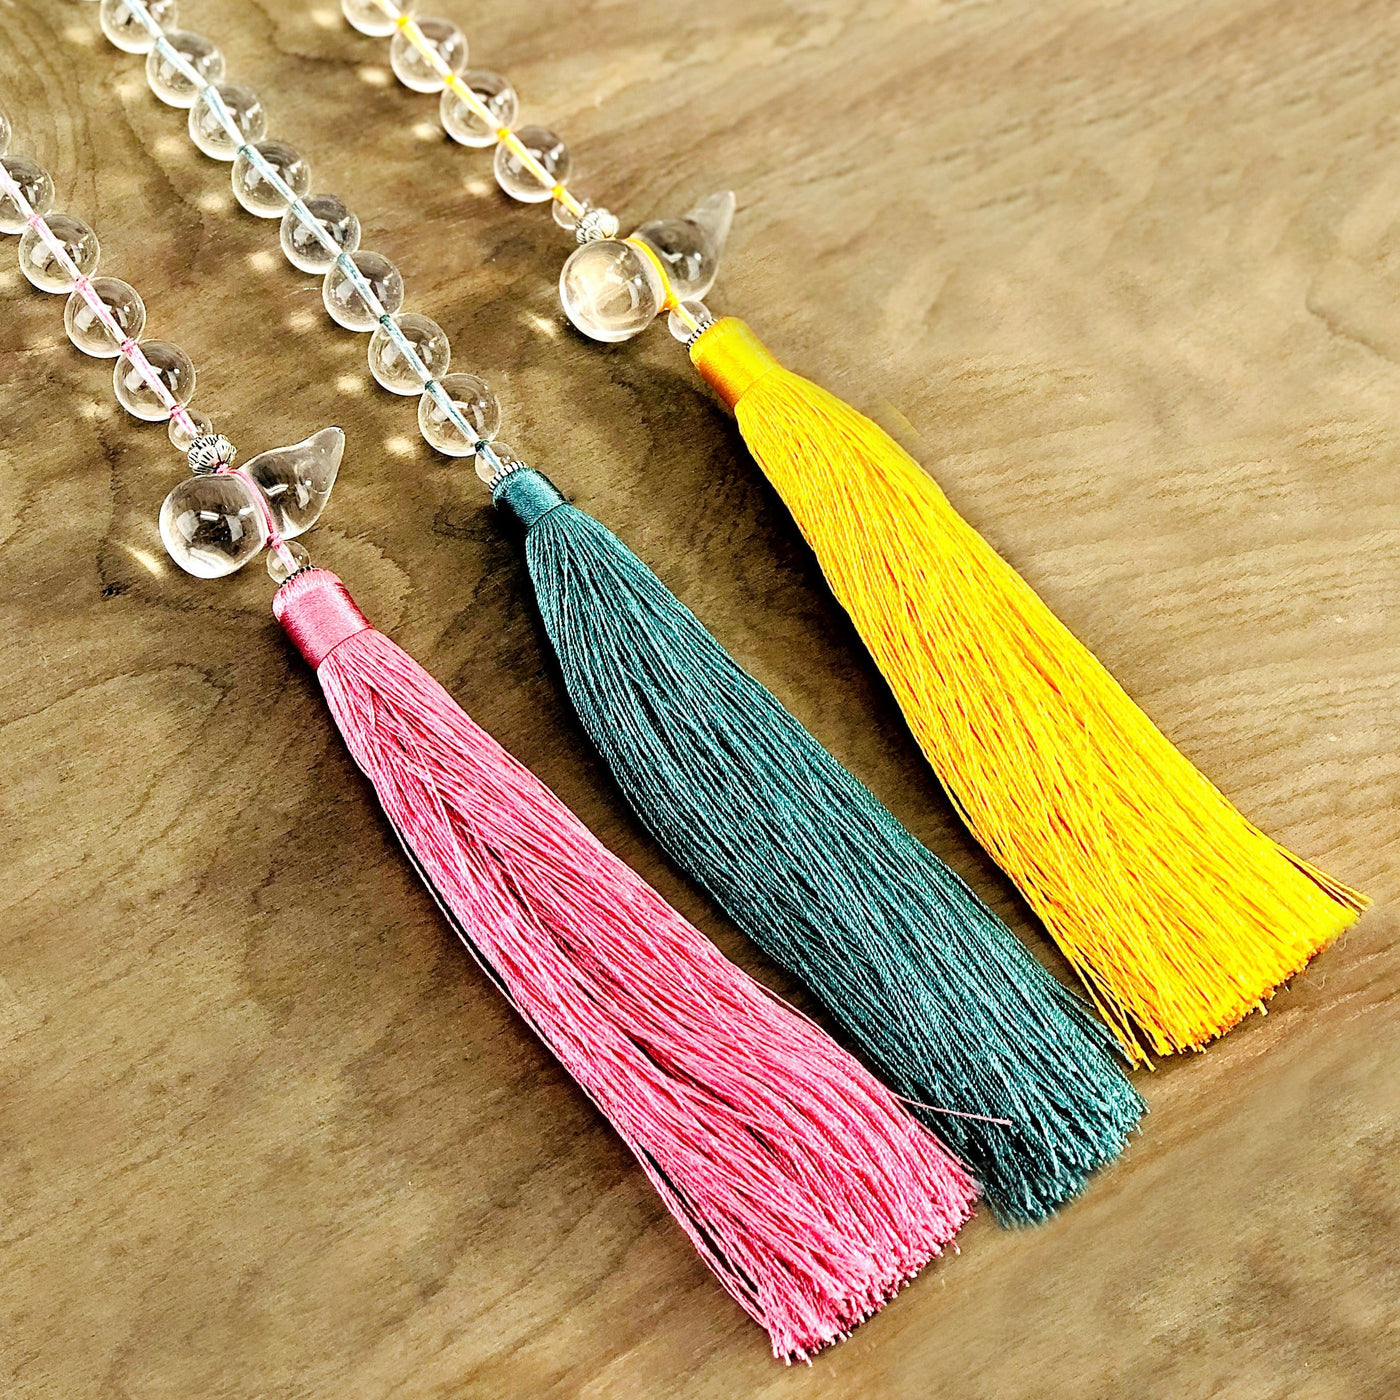 3 different Colored Tassels with Assorted Stone Beads